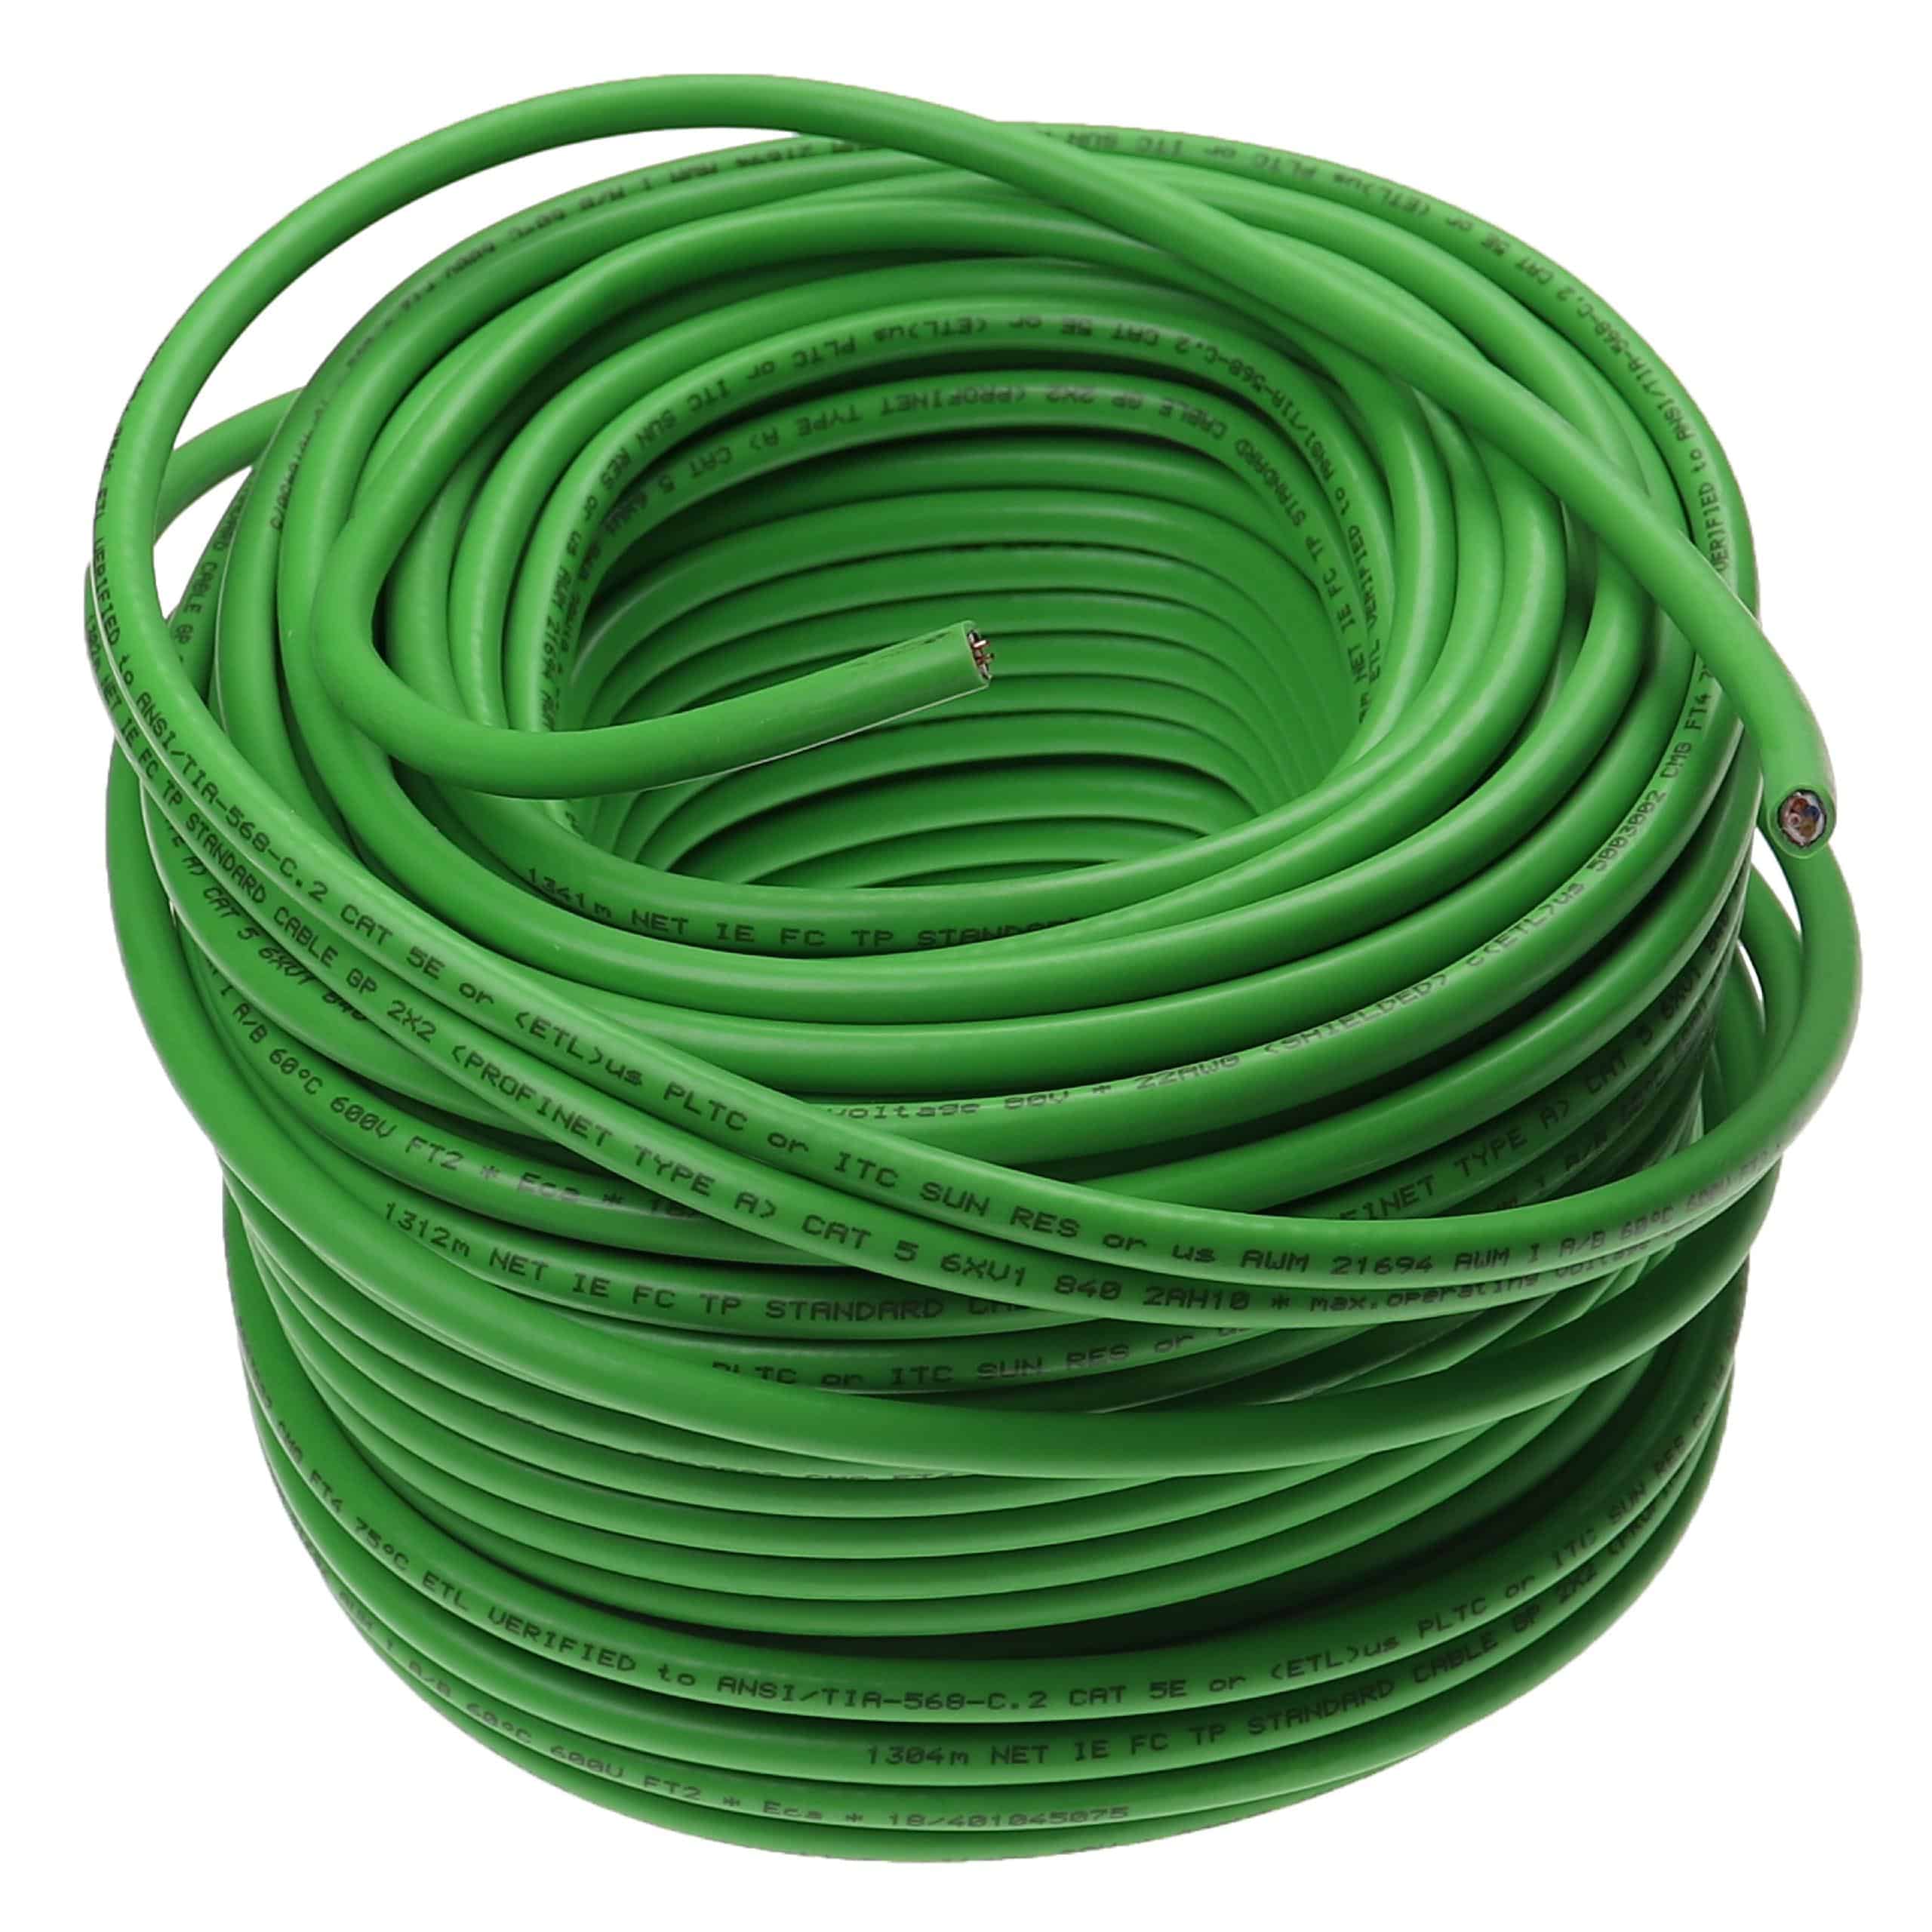 vhbw CAT 5E Installation Cable for System Network - Network Cable Green, 50 m